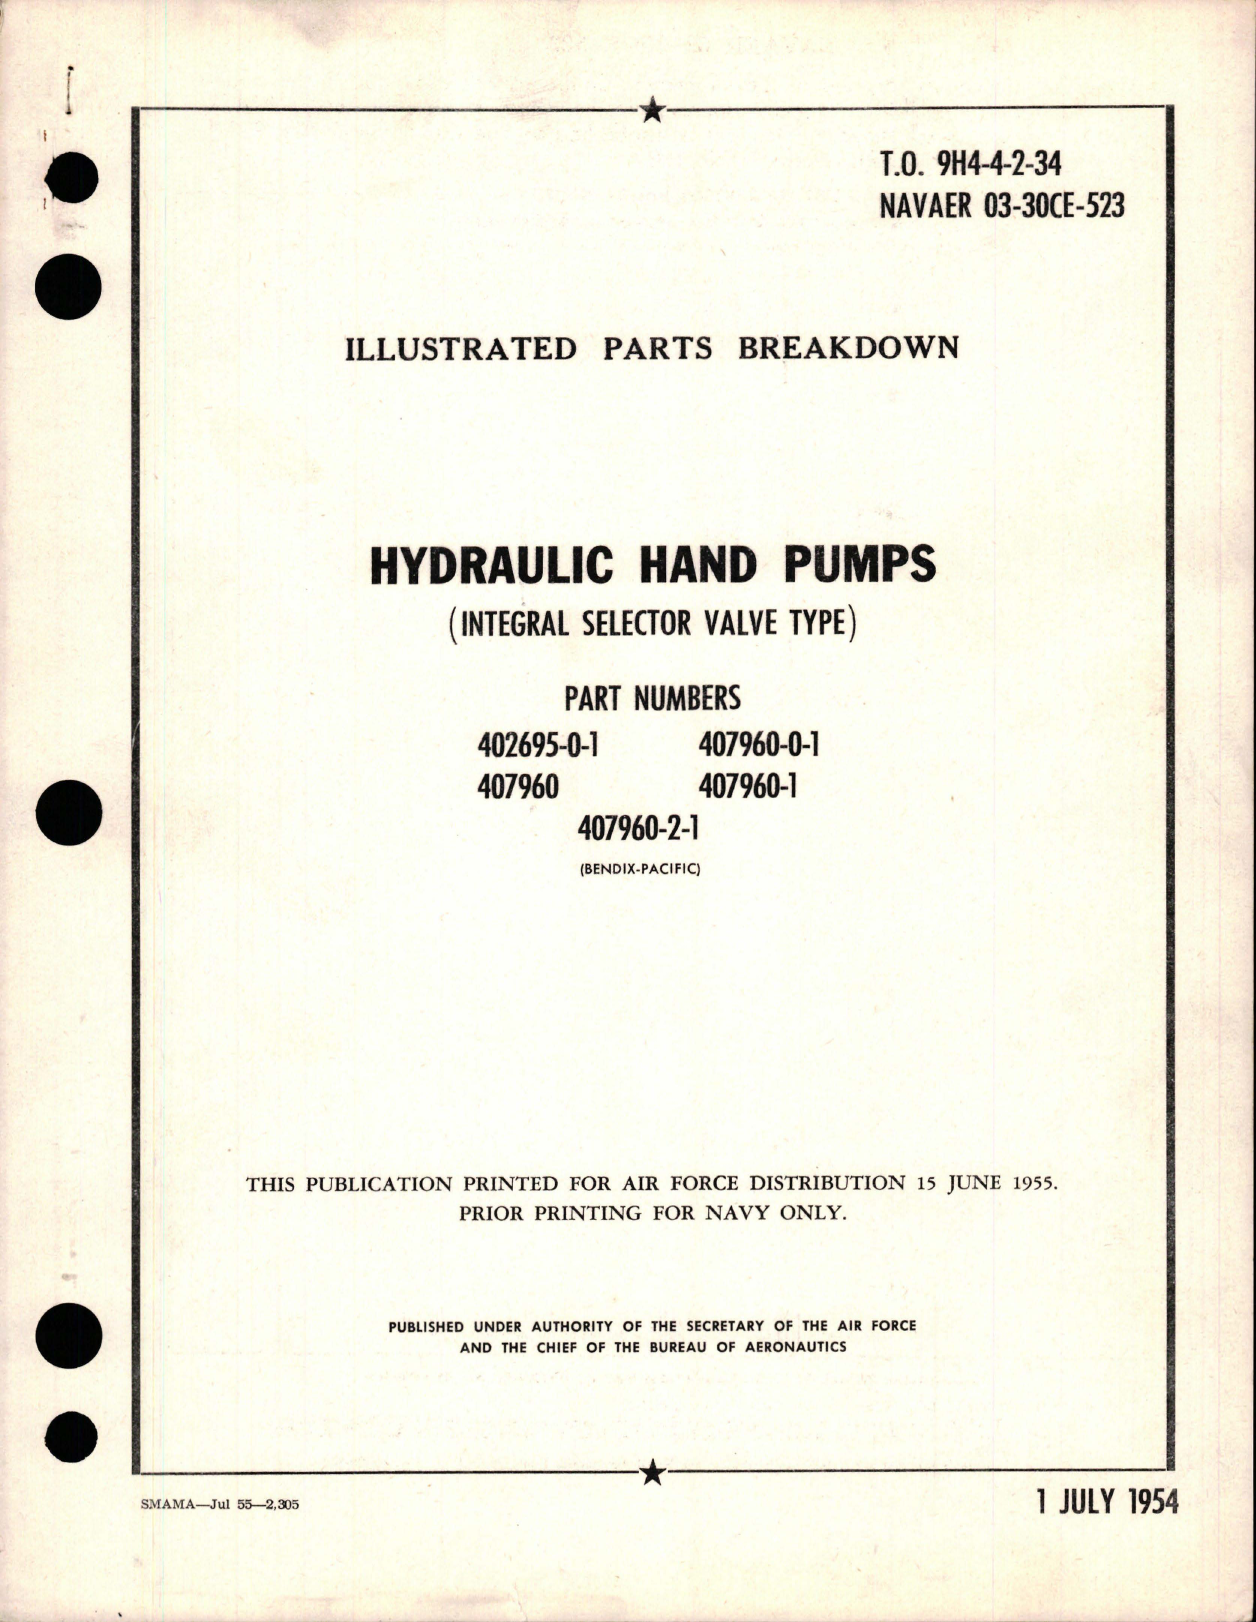 Sample page 1 from AirCorps Library document: Illustrated Parts Breakdown for Hydraulic Hand Pumps - Integral Selector Valve Type 